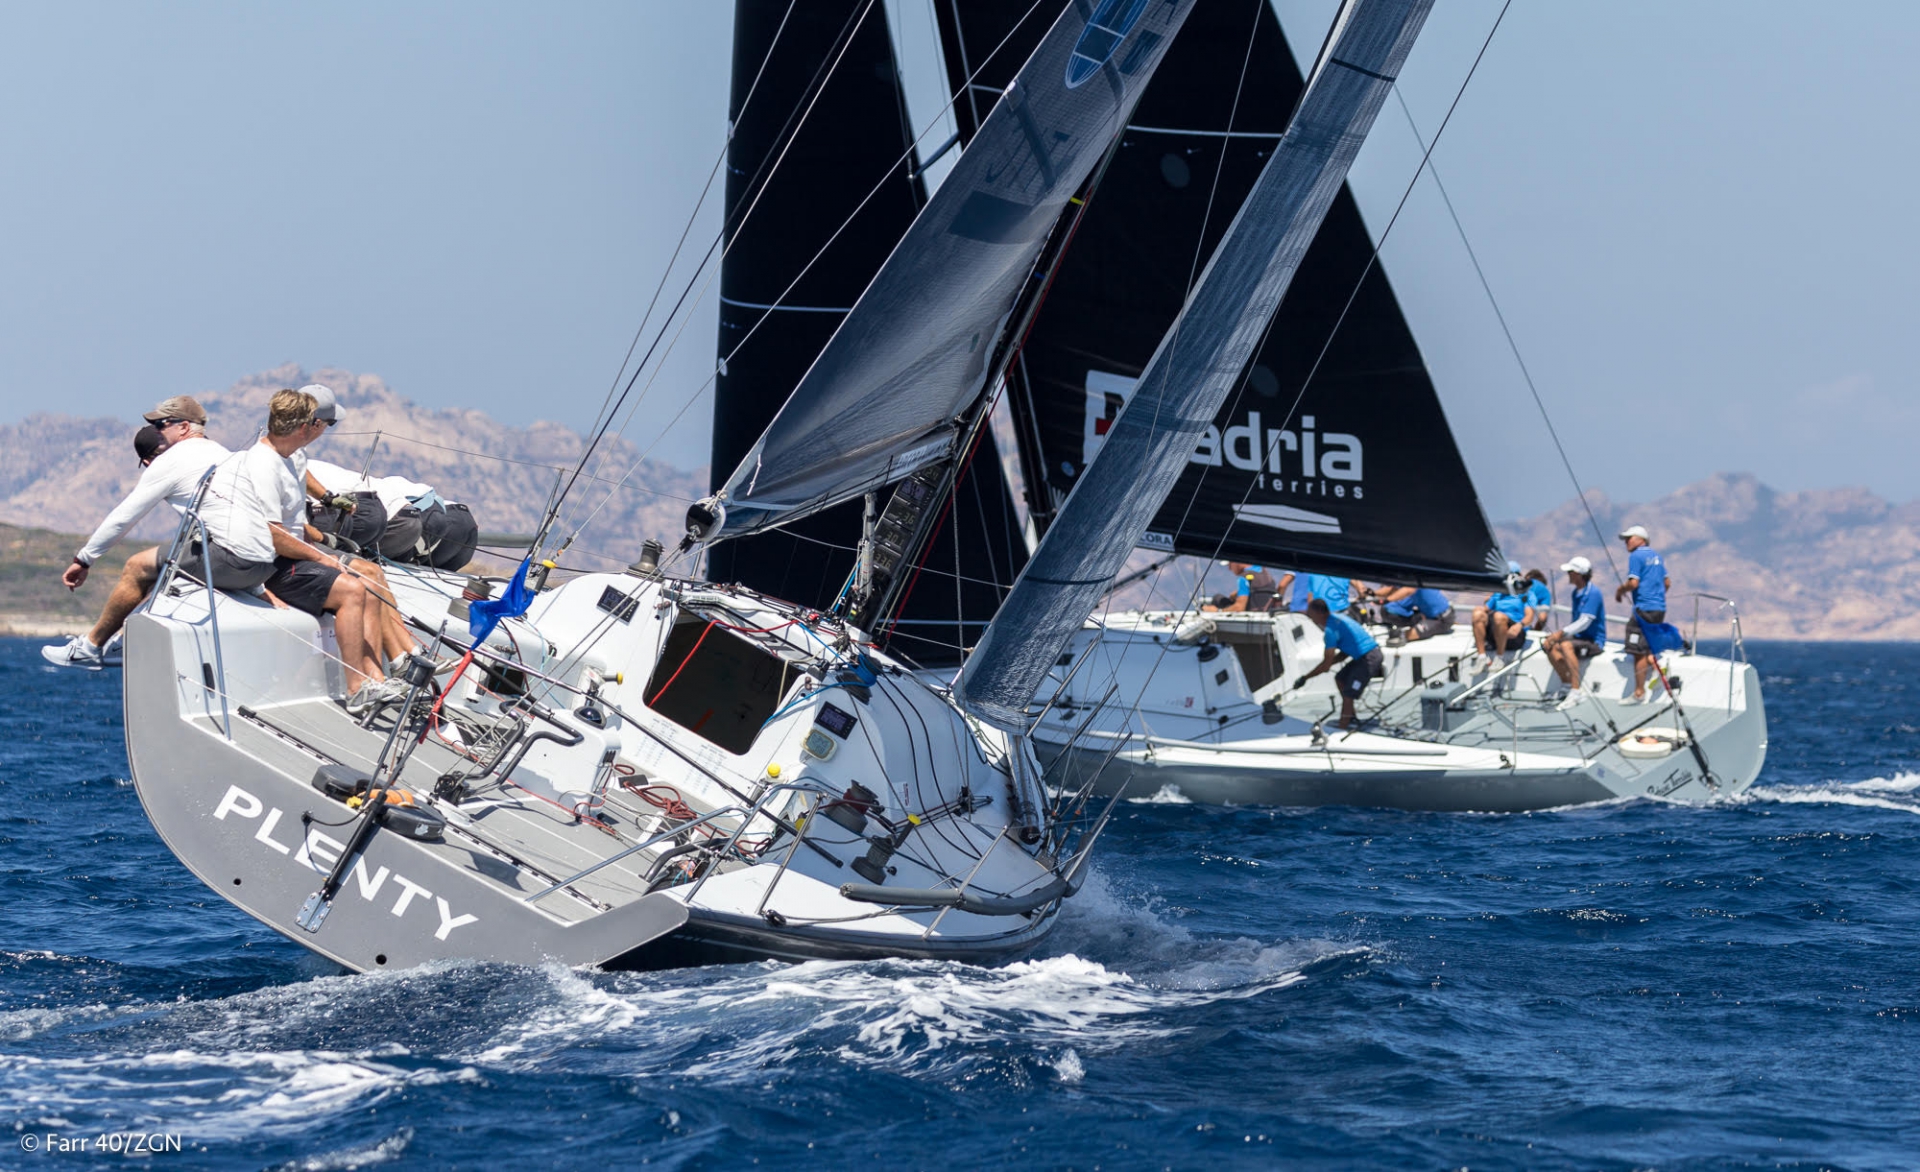 FARR 40 Pre-Worlds: Plenty is in the lead at the end of the first day - NEWS - Yacht Club Costa Smeralda